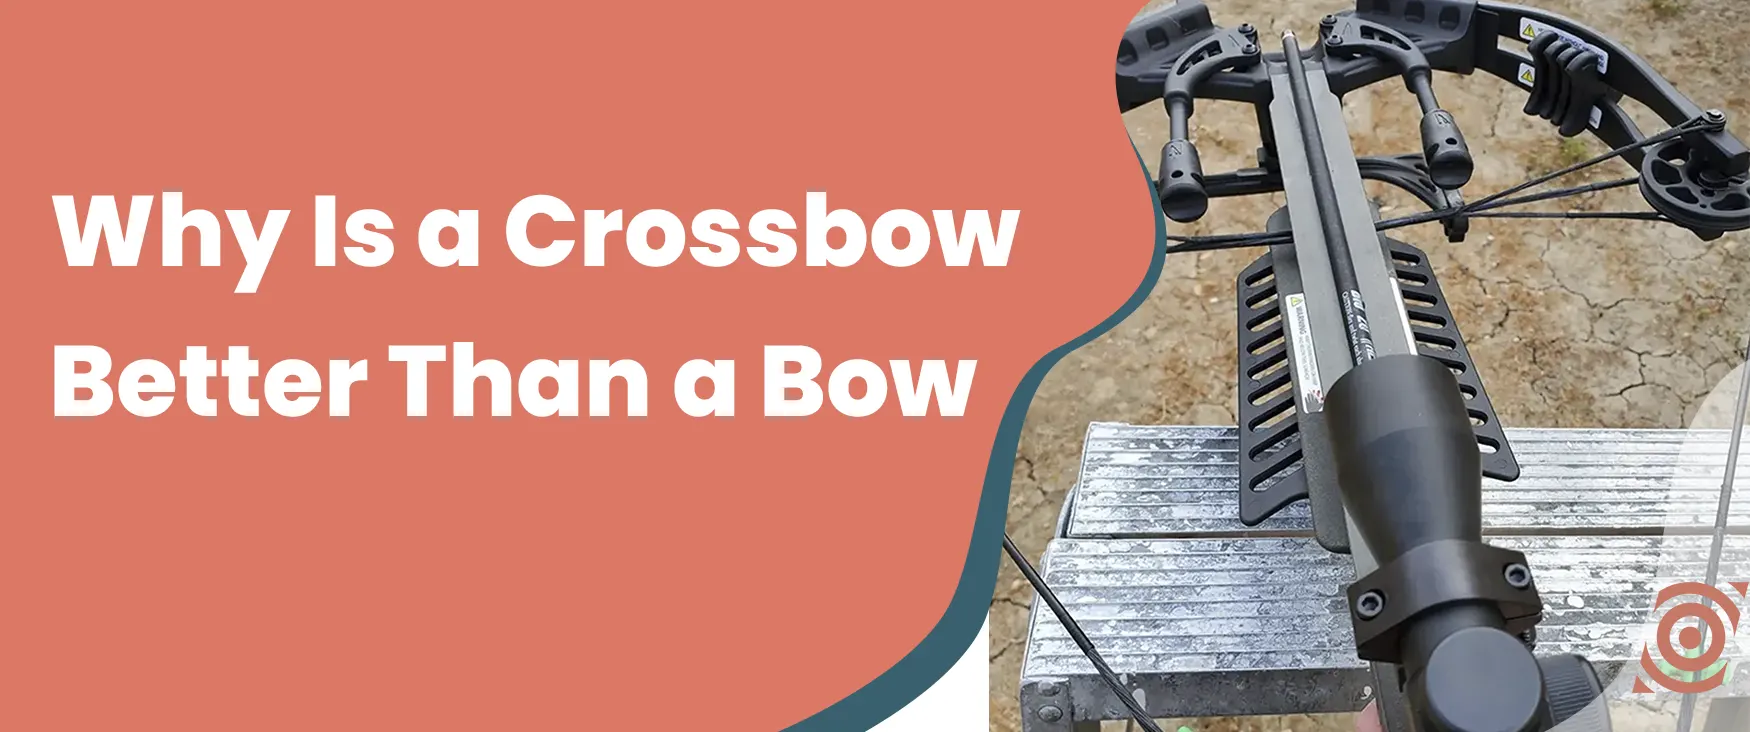 Why is a Crossbow Better Than a Bow